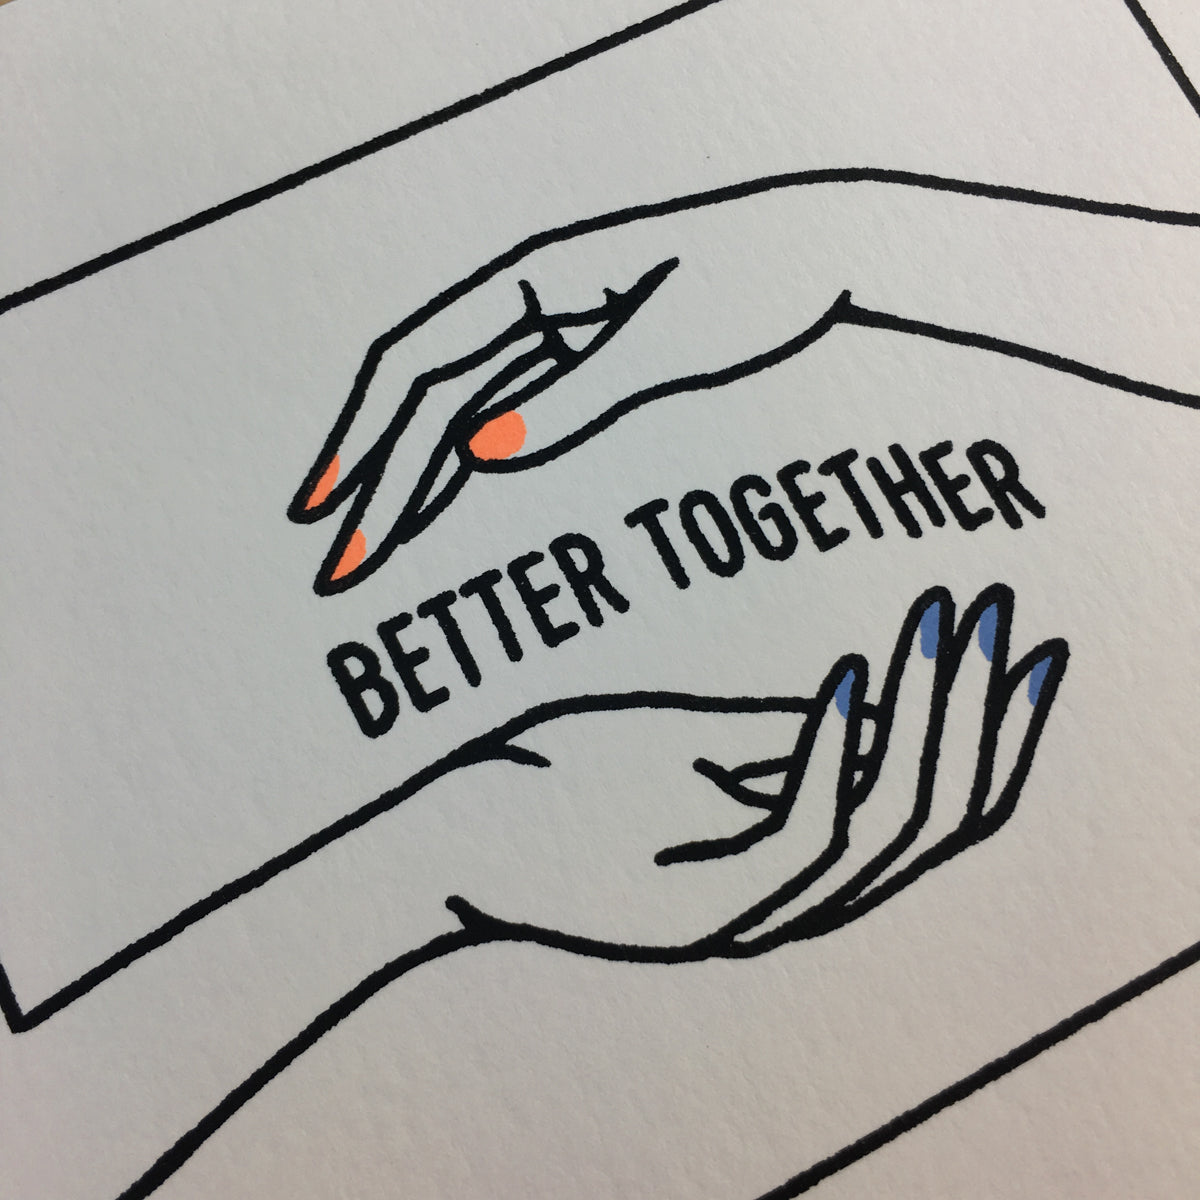 Sold out. Better Together - Signed Print #178